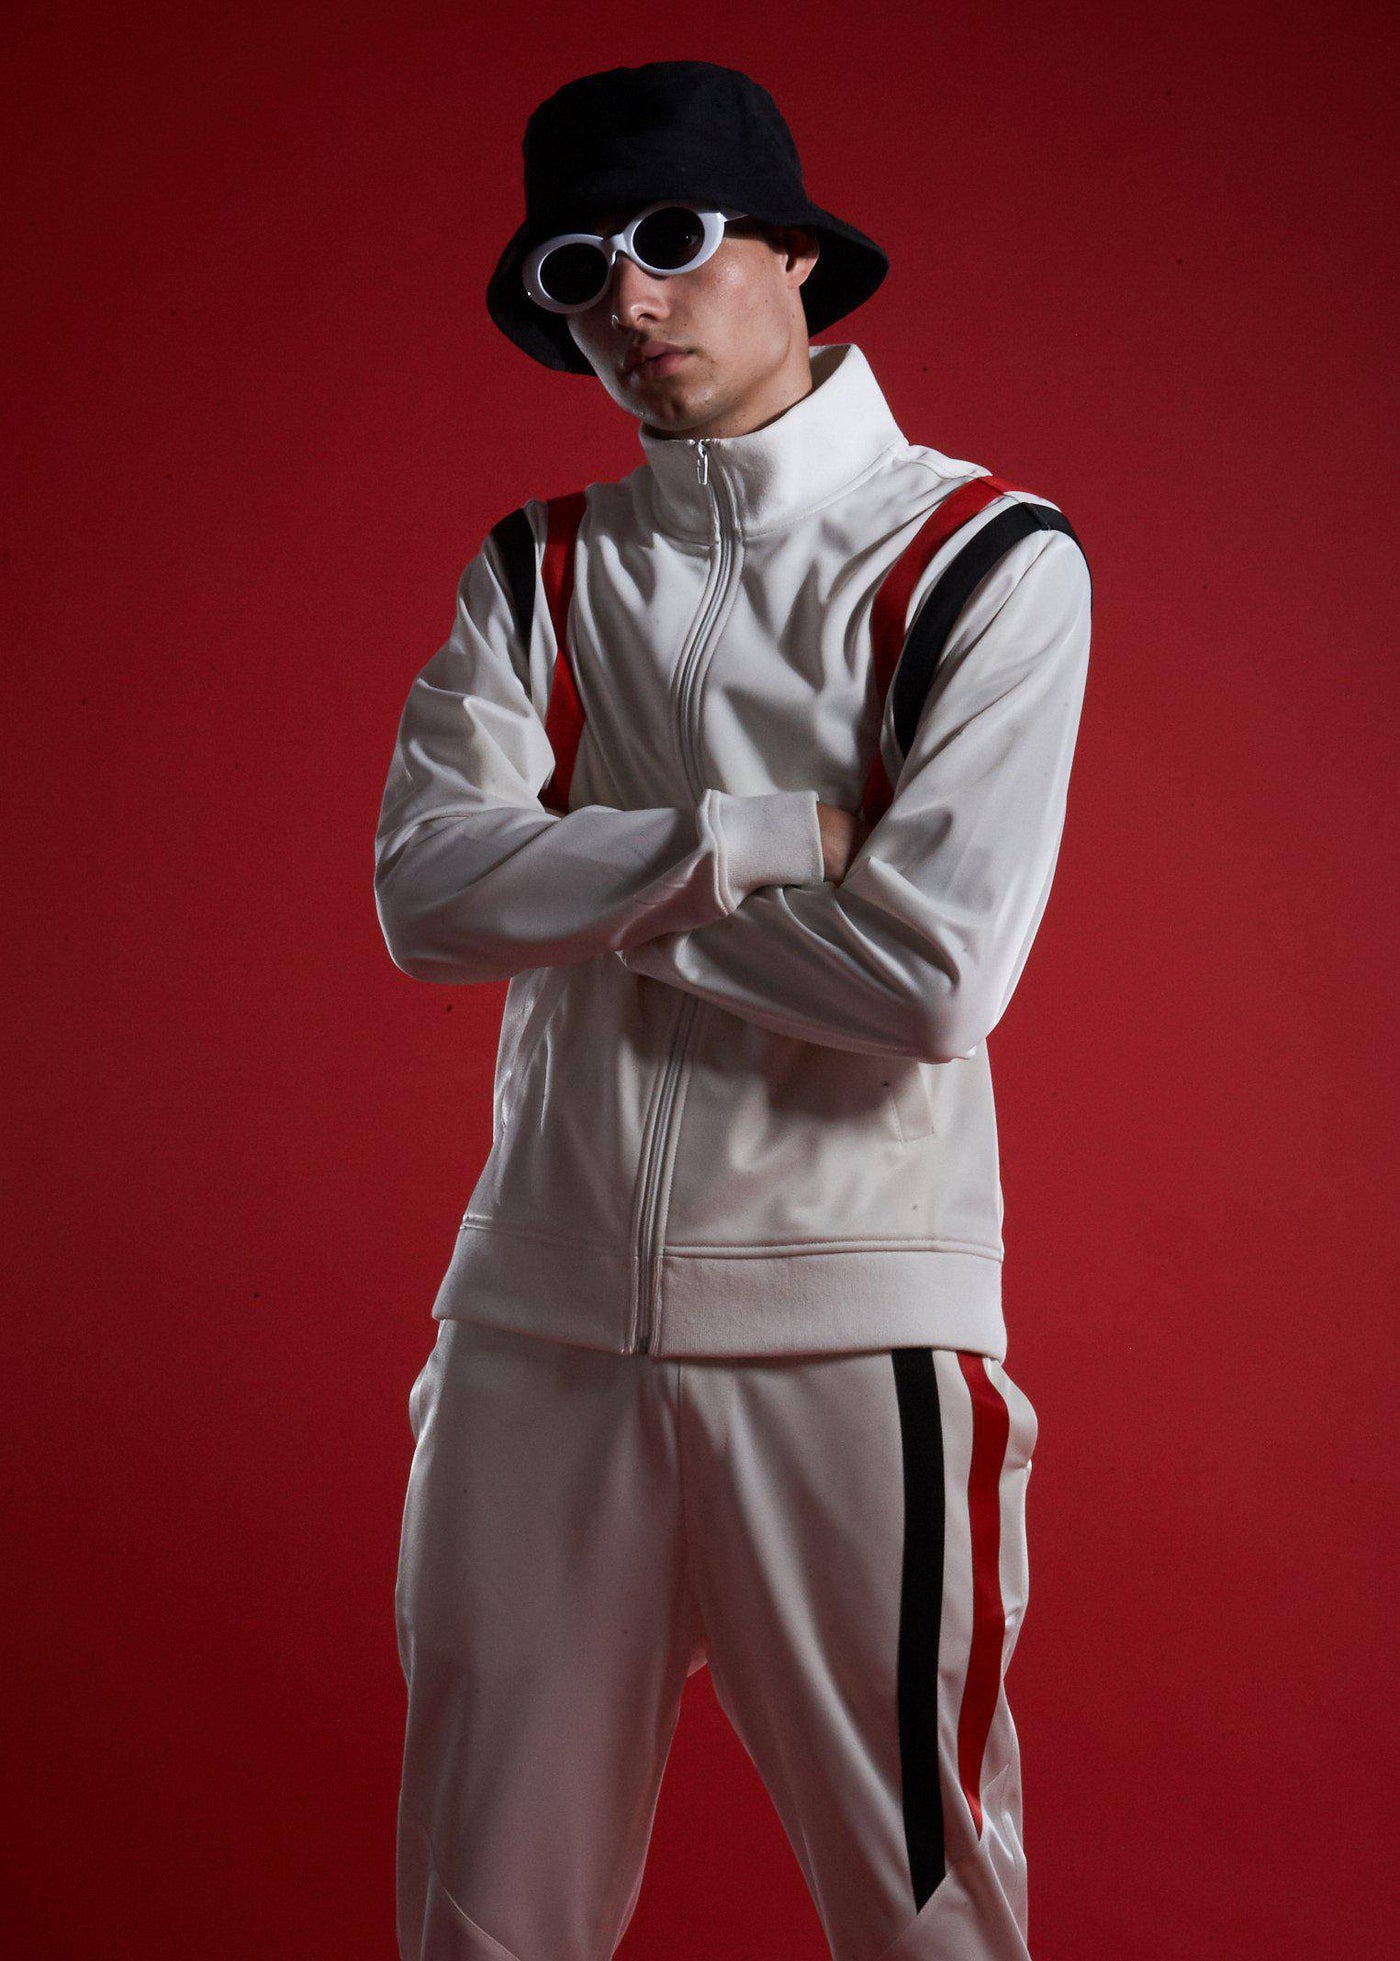 Blank State Men's Track Jacket in White by Shop at Konus